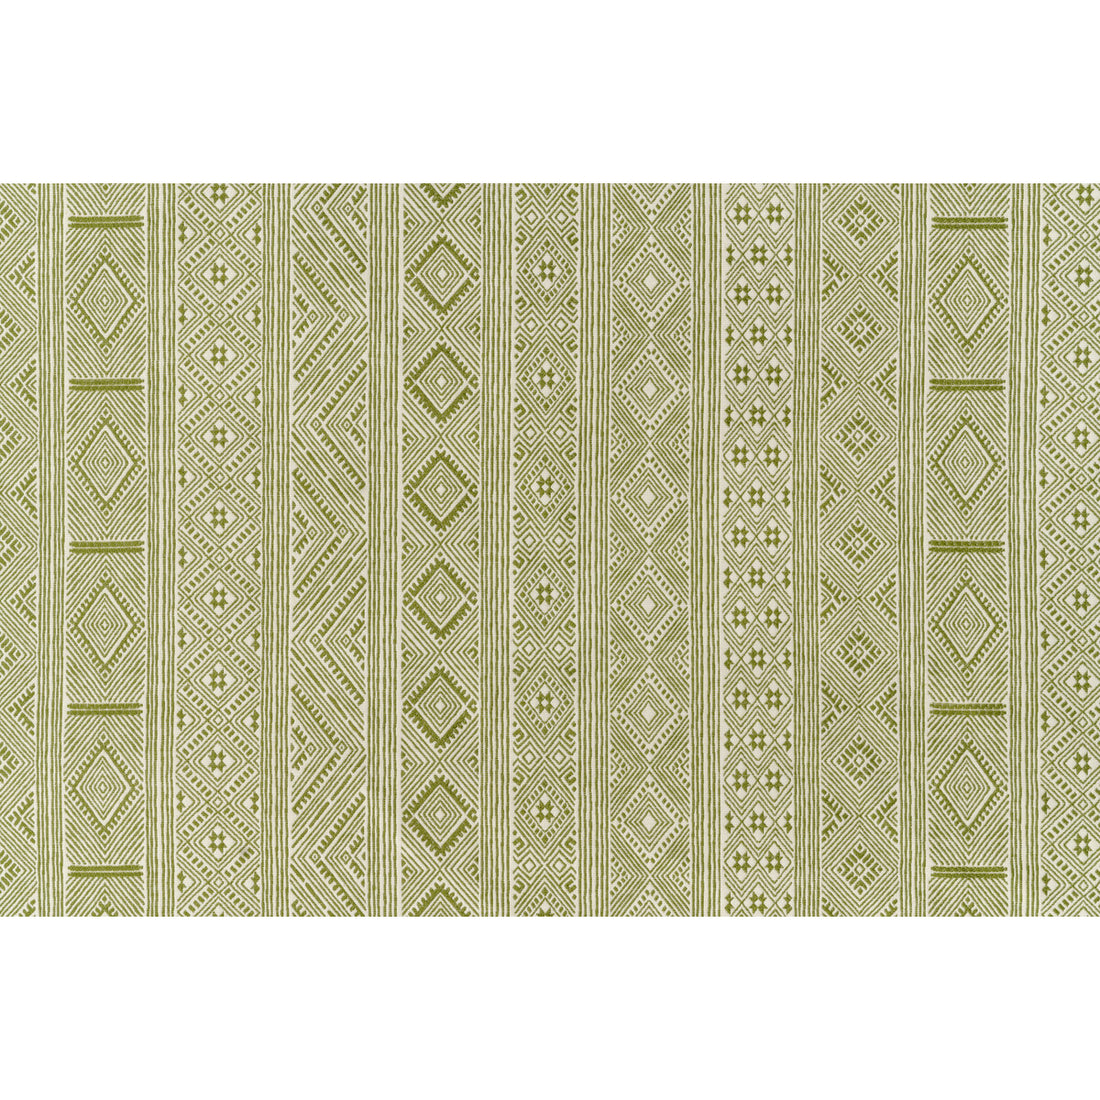 Halsey fabric in leaf green color - pattern BFC-3663.3.0 - by Lee Jofa in the Blithfield collection